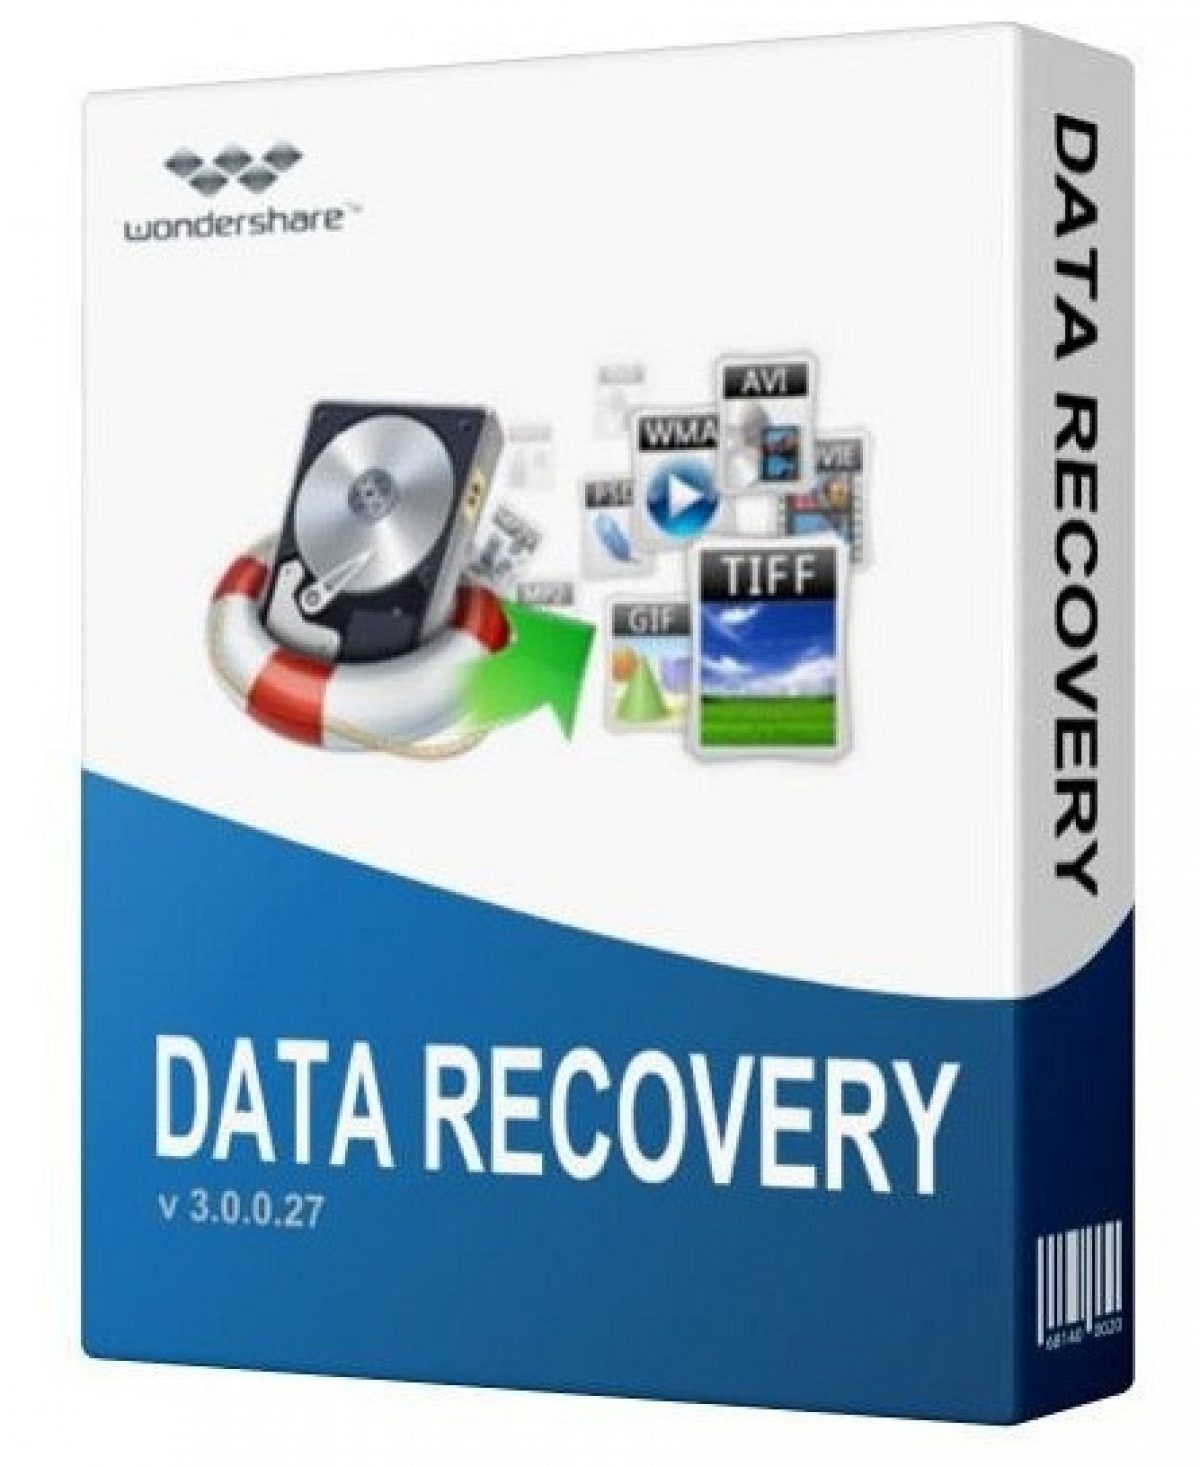 wondershare_data_recovery_cover_windroidmedia-com_-1200x1466-9039923